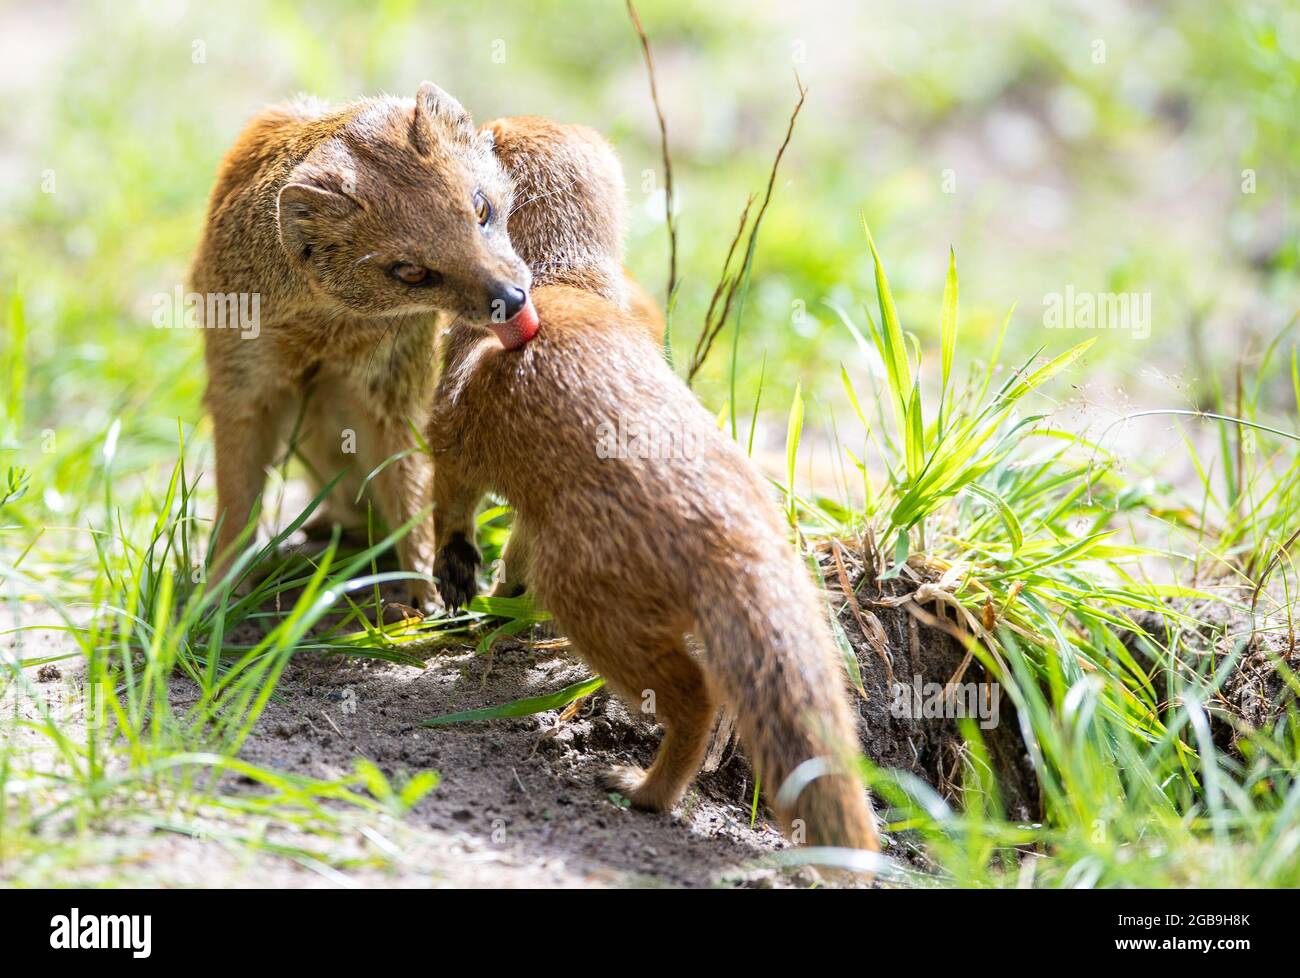 Nordhorn, Germany. 02nd Aug, 2021. A fox mongoose cleans a young animal.  The Nordhorn Zoo has